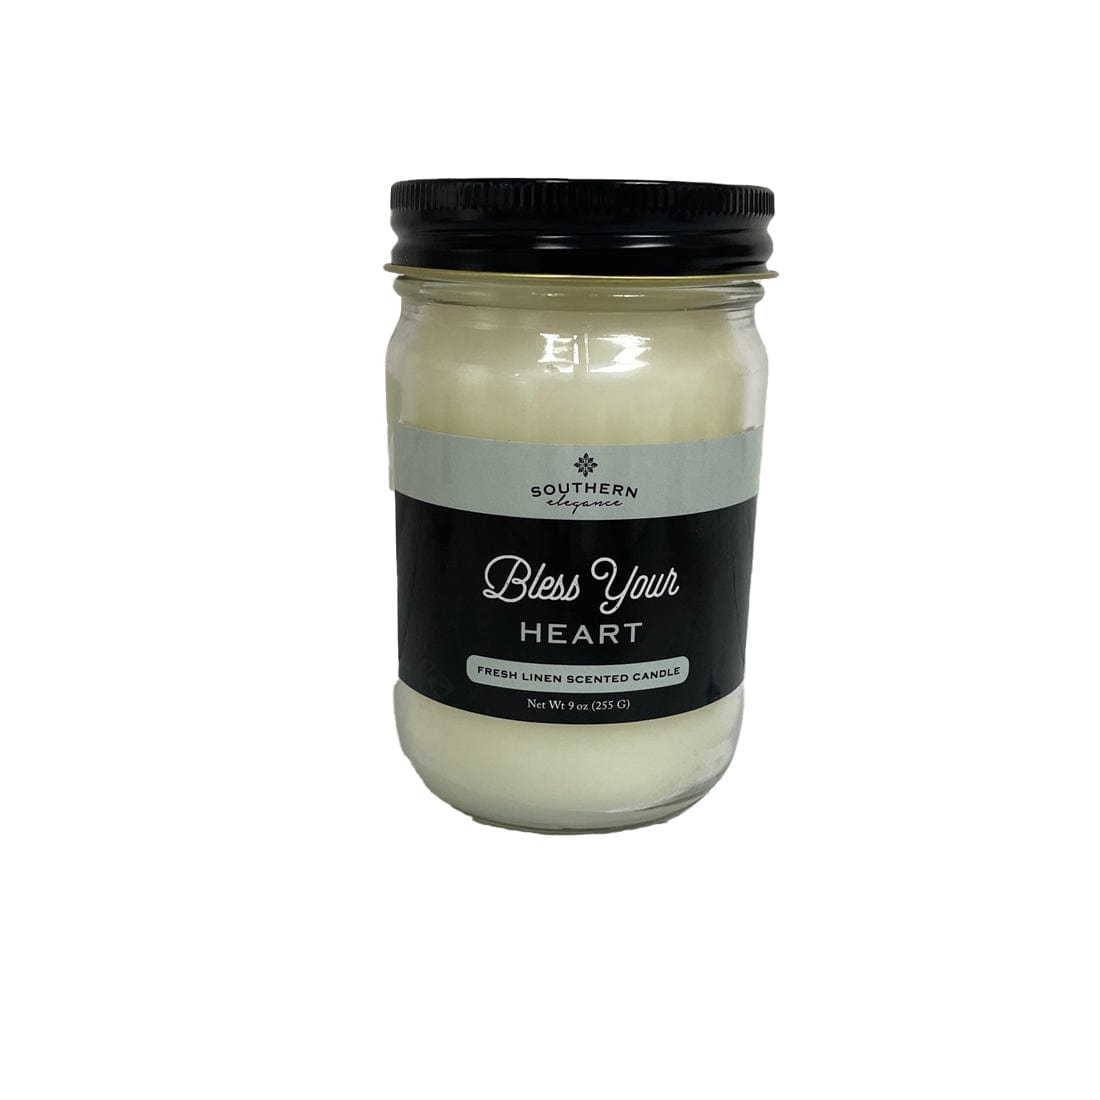 Southern Elegance Candle Co Southern Elegance Candle Co Bless Your Heart 9 oz Candle